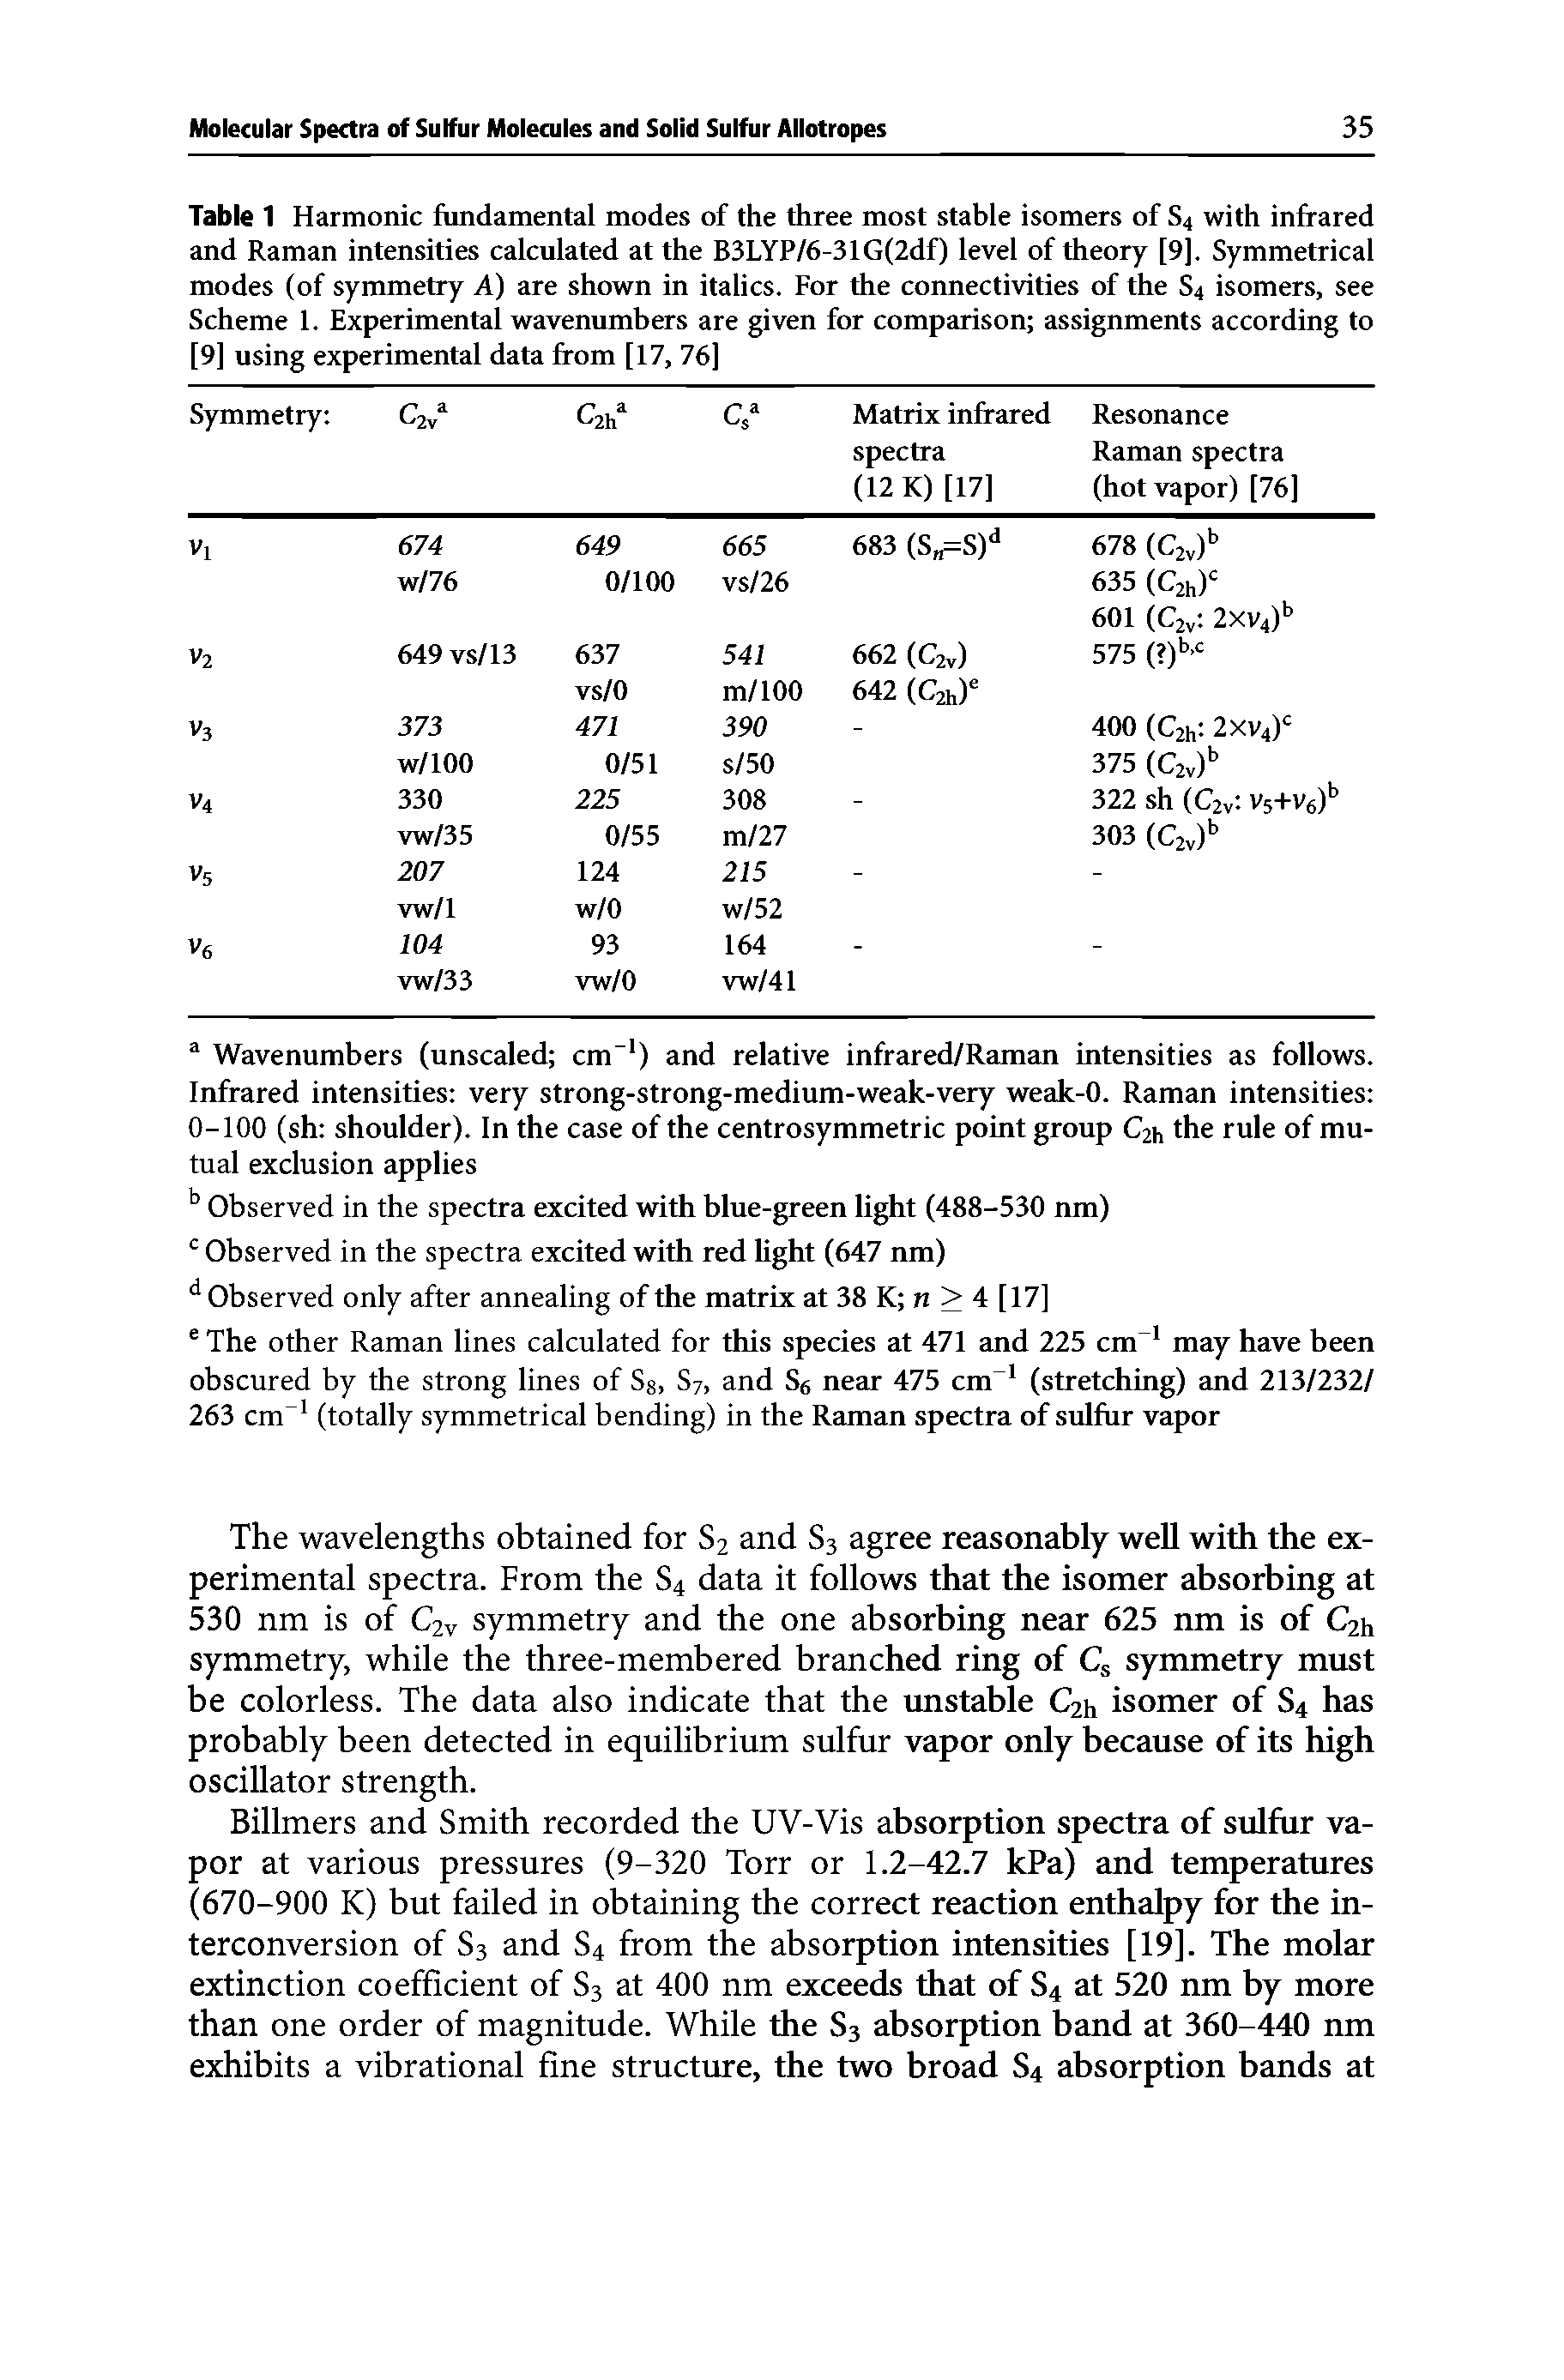 Table 1 Harmonic fundamental modes of the three most stable isomers of S4 with infrared and Raman intensities calculated at the B3LYP/6-31G(2df) level of theory [9]. Symmetrical modes (of symmetry A) are shown in italics. For the connectivities of the S4 isomers, see Scheme 1. Experimental wavenumbers are given for comparison assignments according to [9] using experimental data from [17, 76] ...